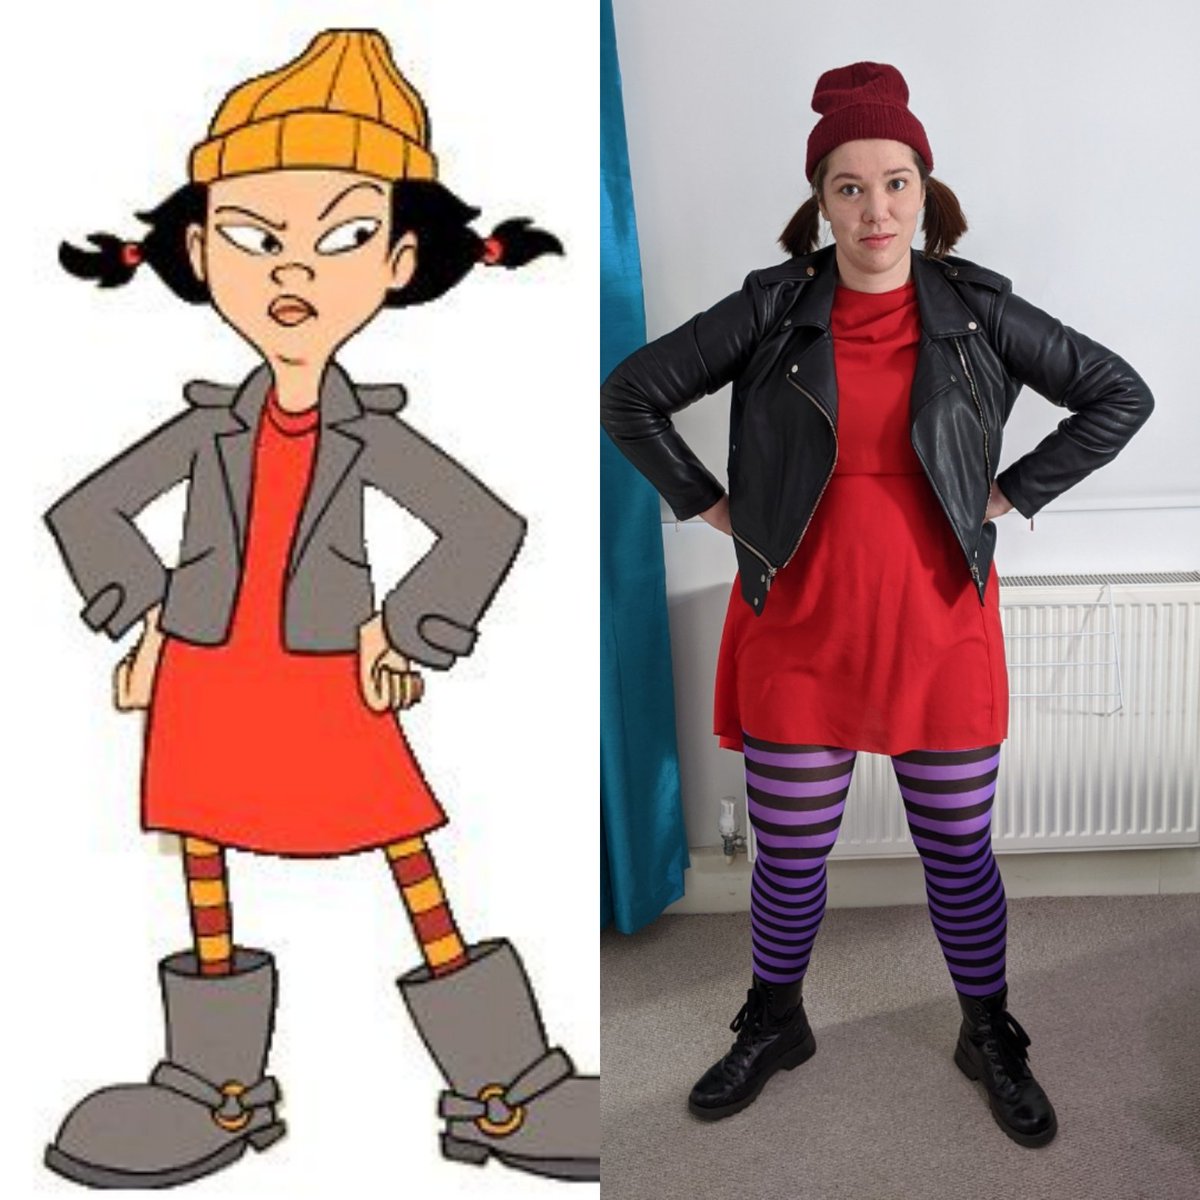 Next in my 26 costumes in two days  #TwoPointSixChallengeSpinelli from Recess. Haven't quite got the colours right - this is Spinelli on laundry day.  https://uk.virginmoneygiving.com/RebeccaCooney2 All slots are now full! But if you're enjoying watching me look daft, feel free to donate anyway x